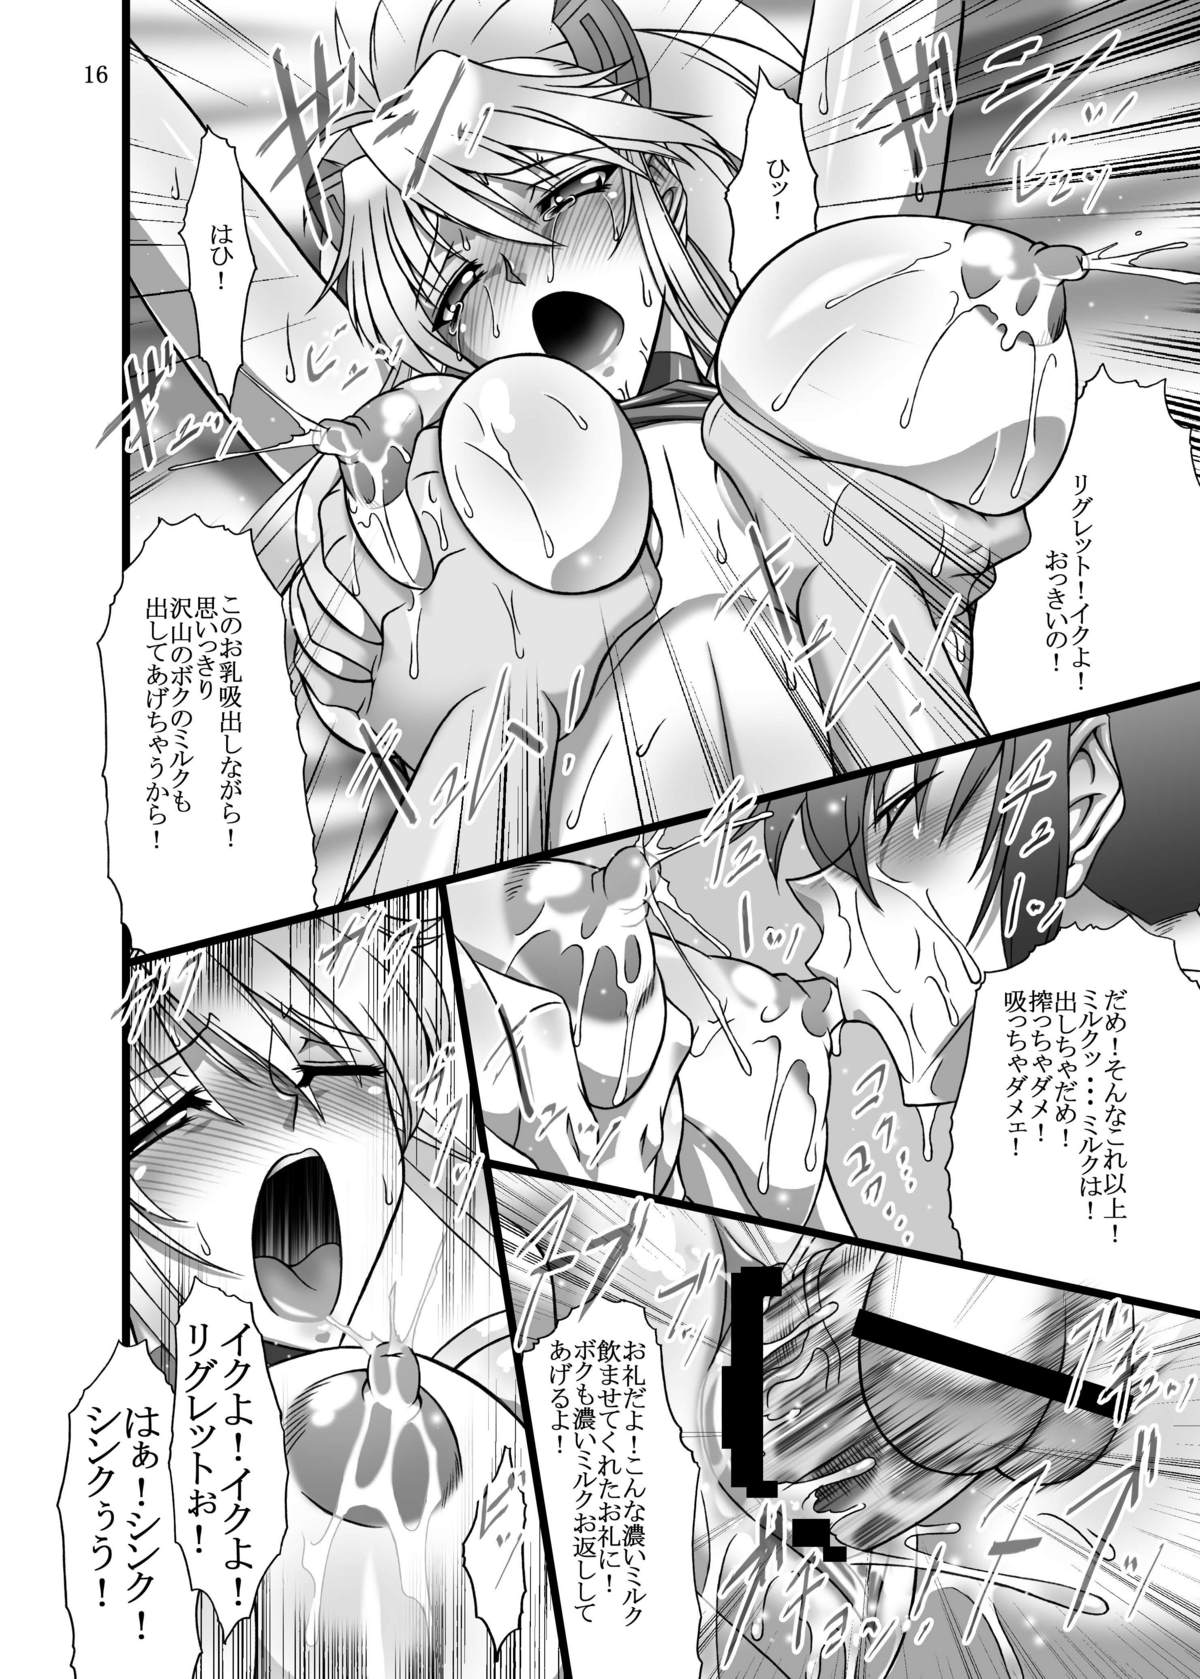 (C78) [Bobcaters (Hamon Ai, r13)] Kyoudou (Tales of the Abyss) page 16 full